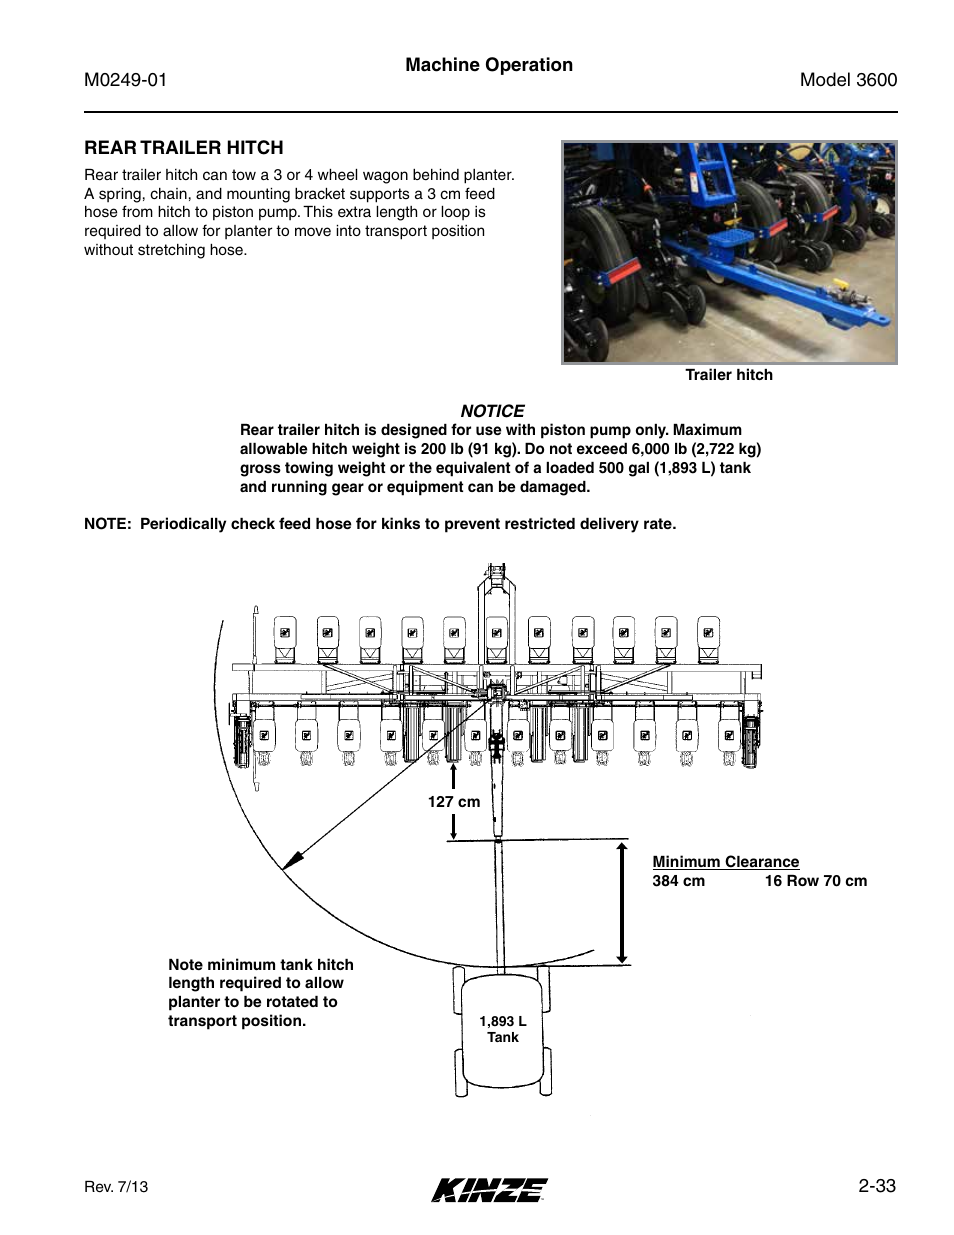 Rear trailer hitch, Rear trailer hitch -33 | Kinze 3600 Lift and Rotate Planter (70 CM) Rev. 5/14 User Manual | Page 45 / 158